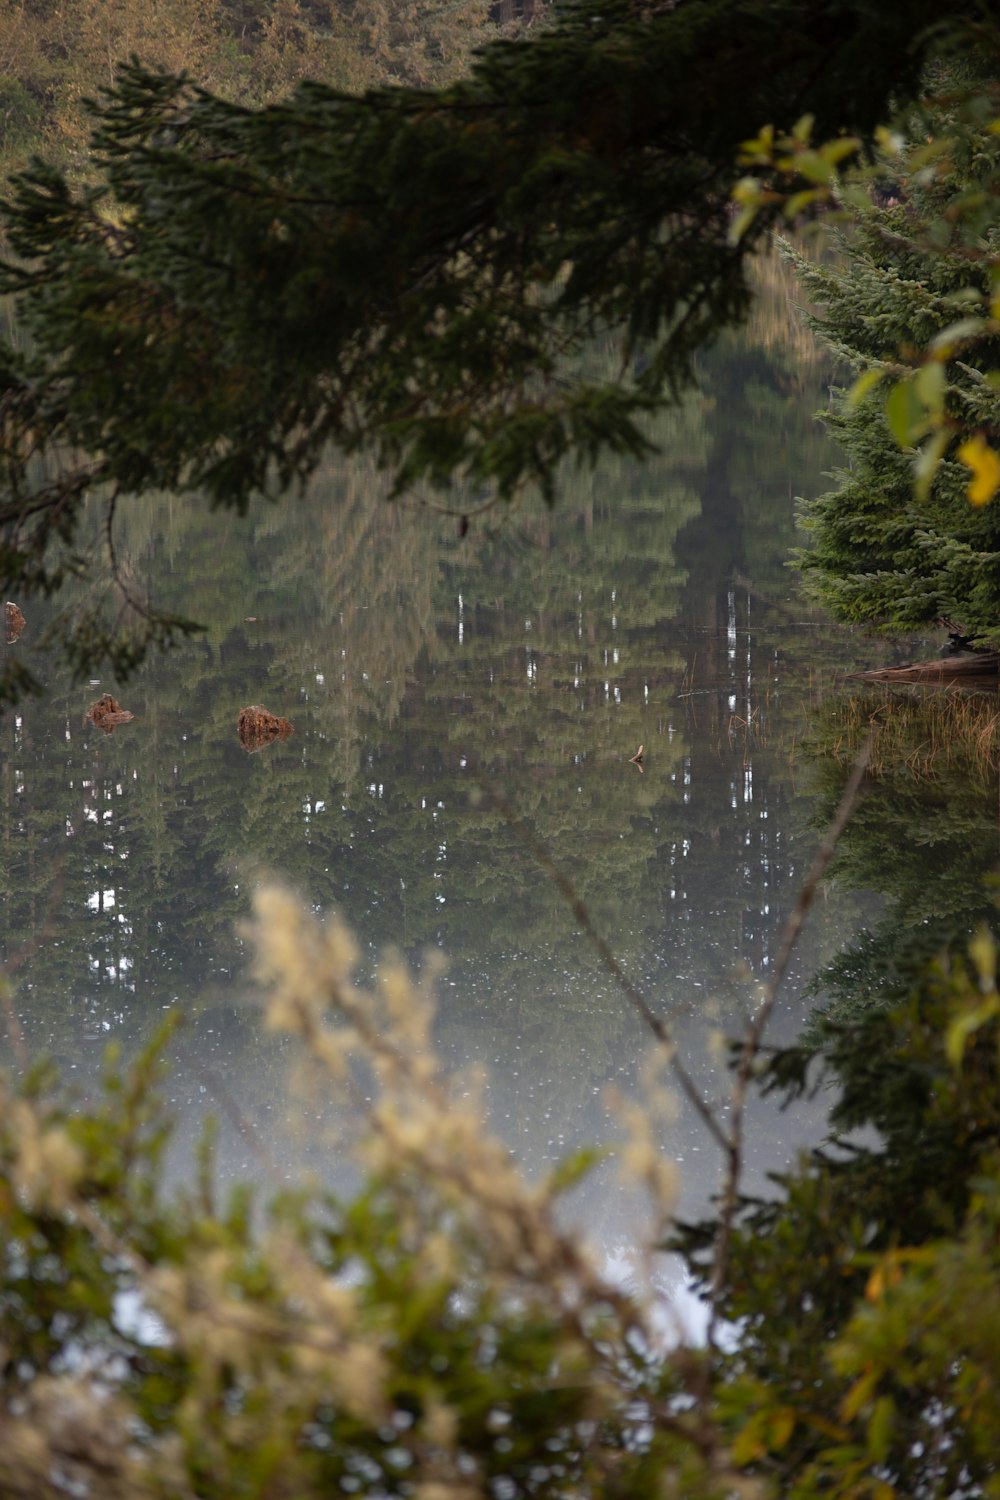 a group of birds swimming in a pond surrounded by trees